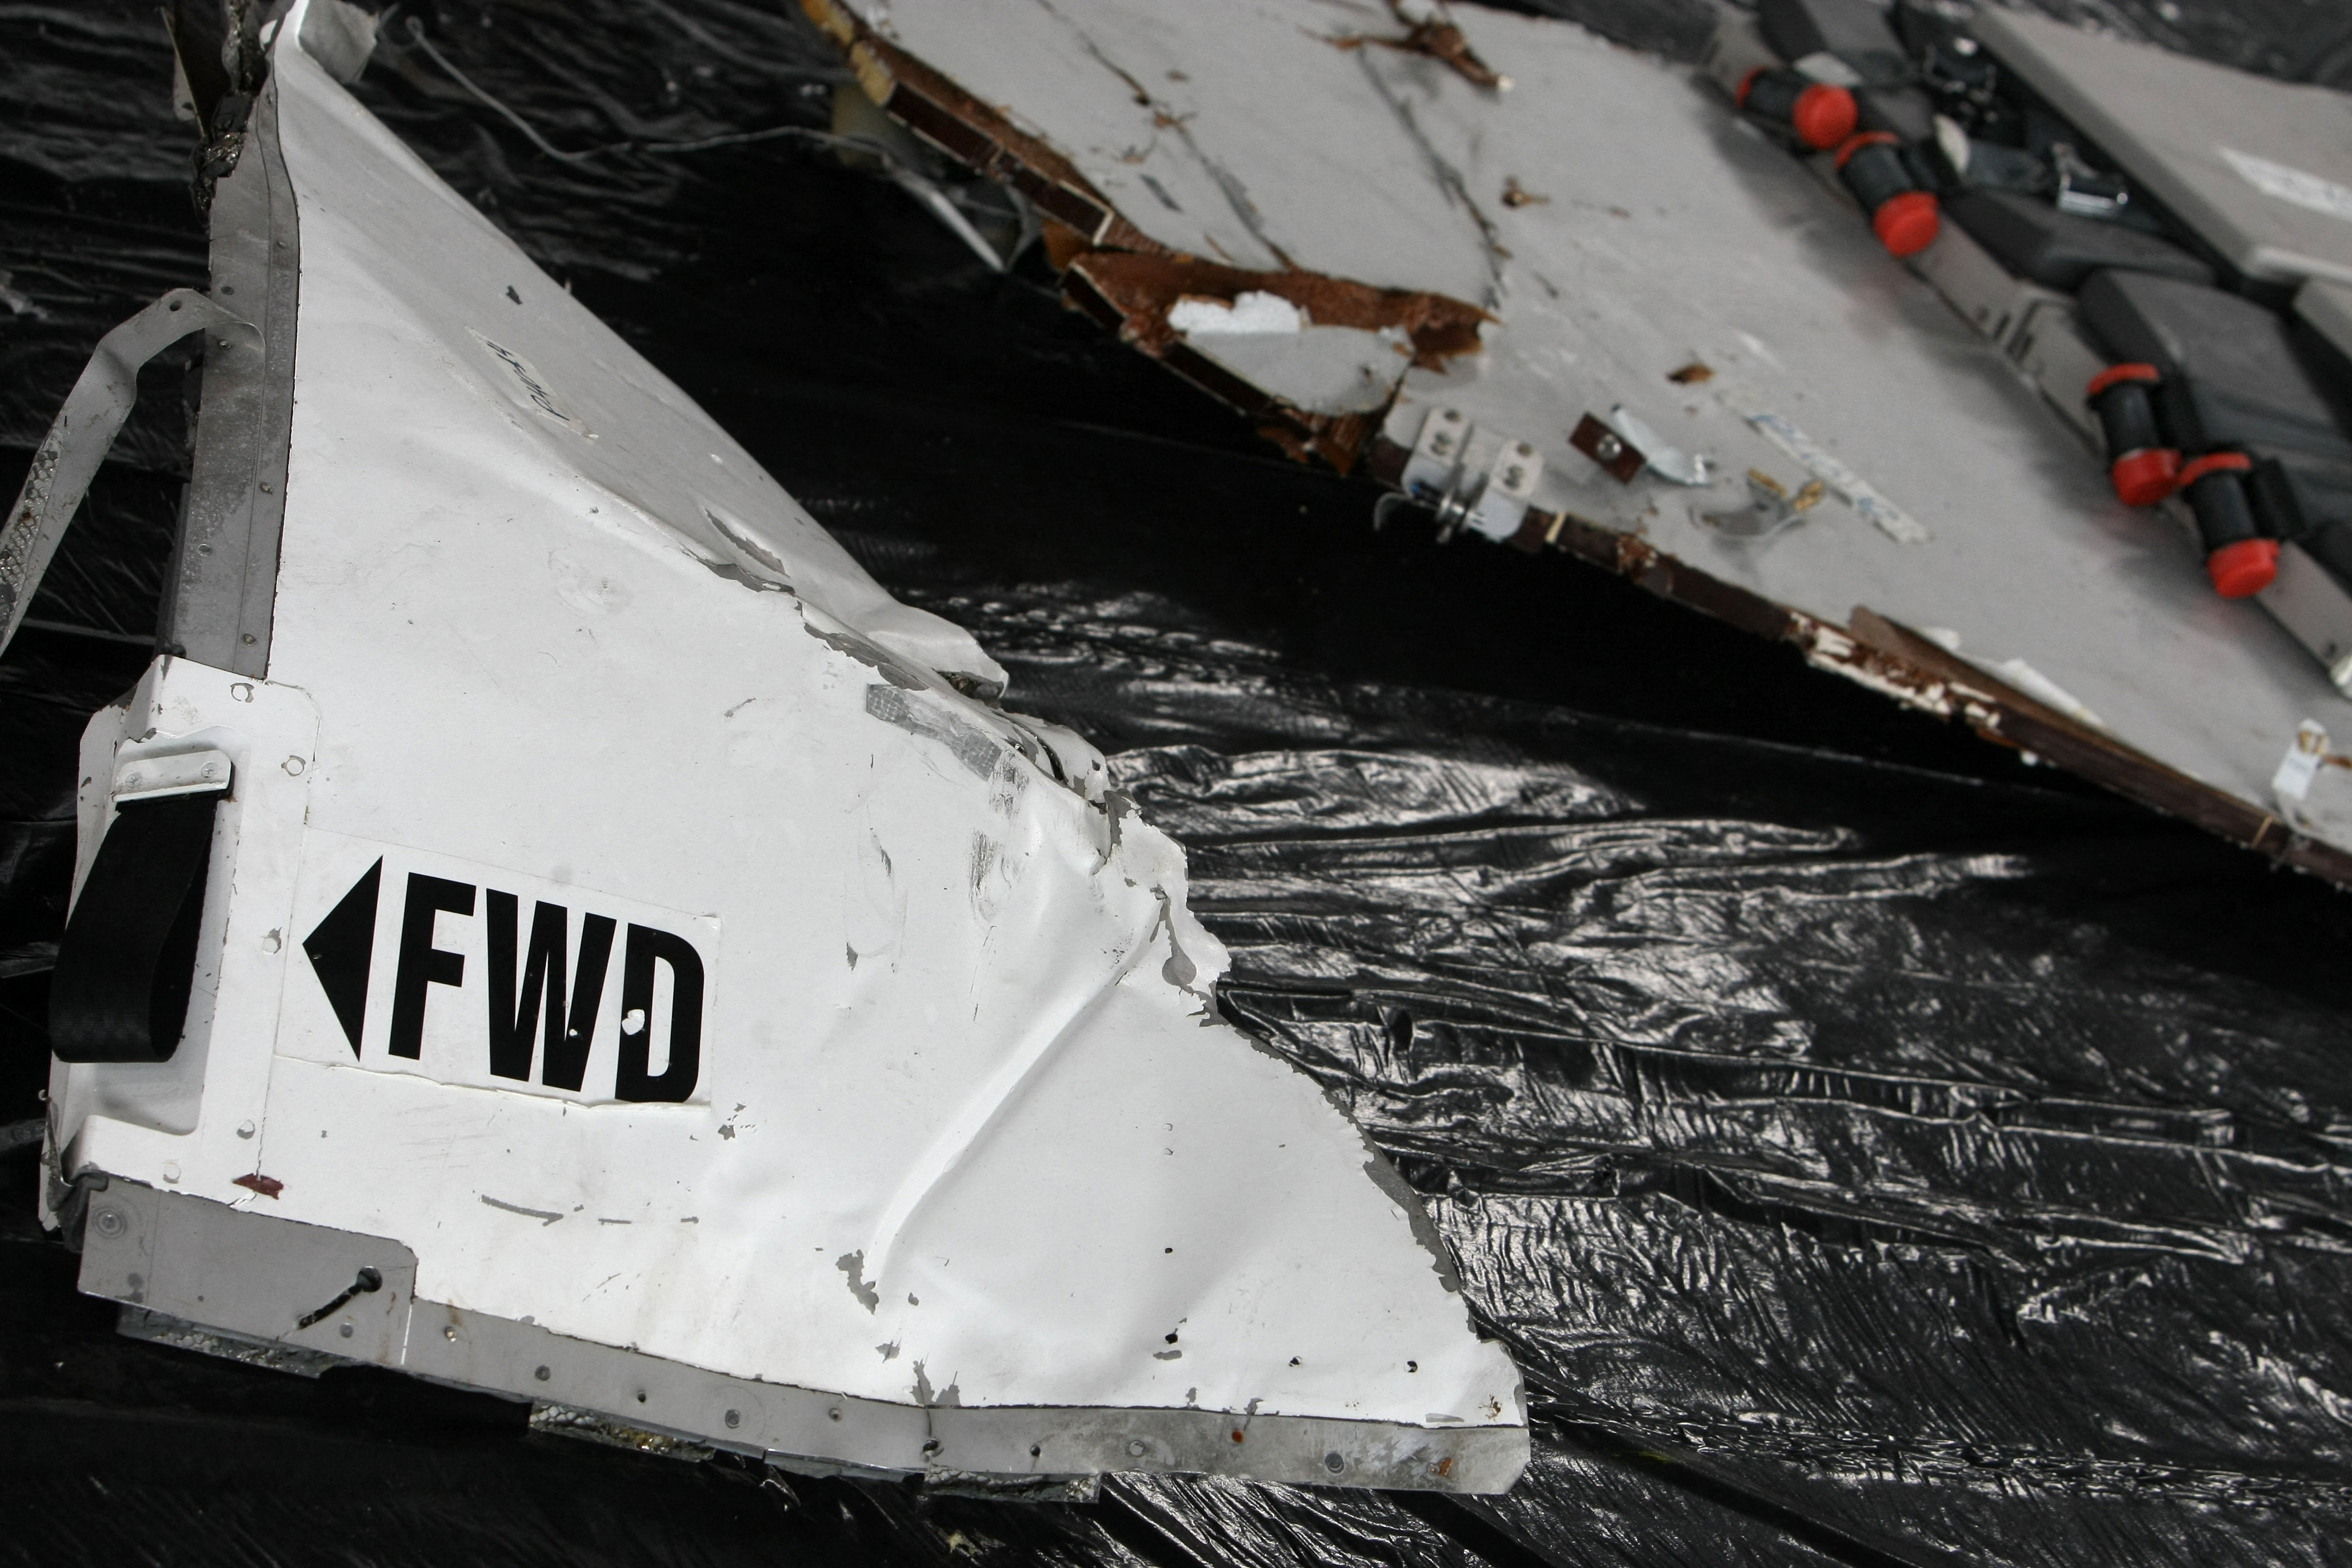 Wreckage pieces from the Air France A330 aircraft, flight AF447 that crashed in 2009 | Source: Getty Images